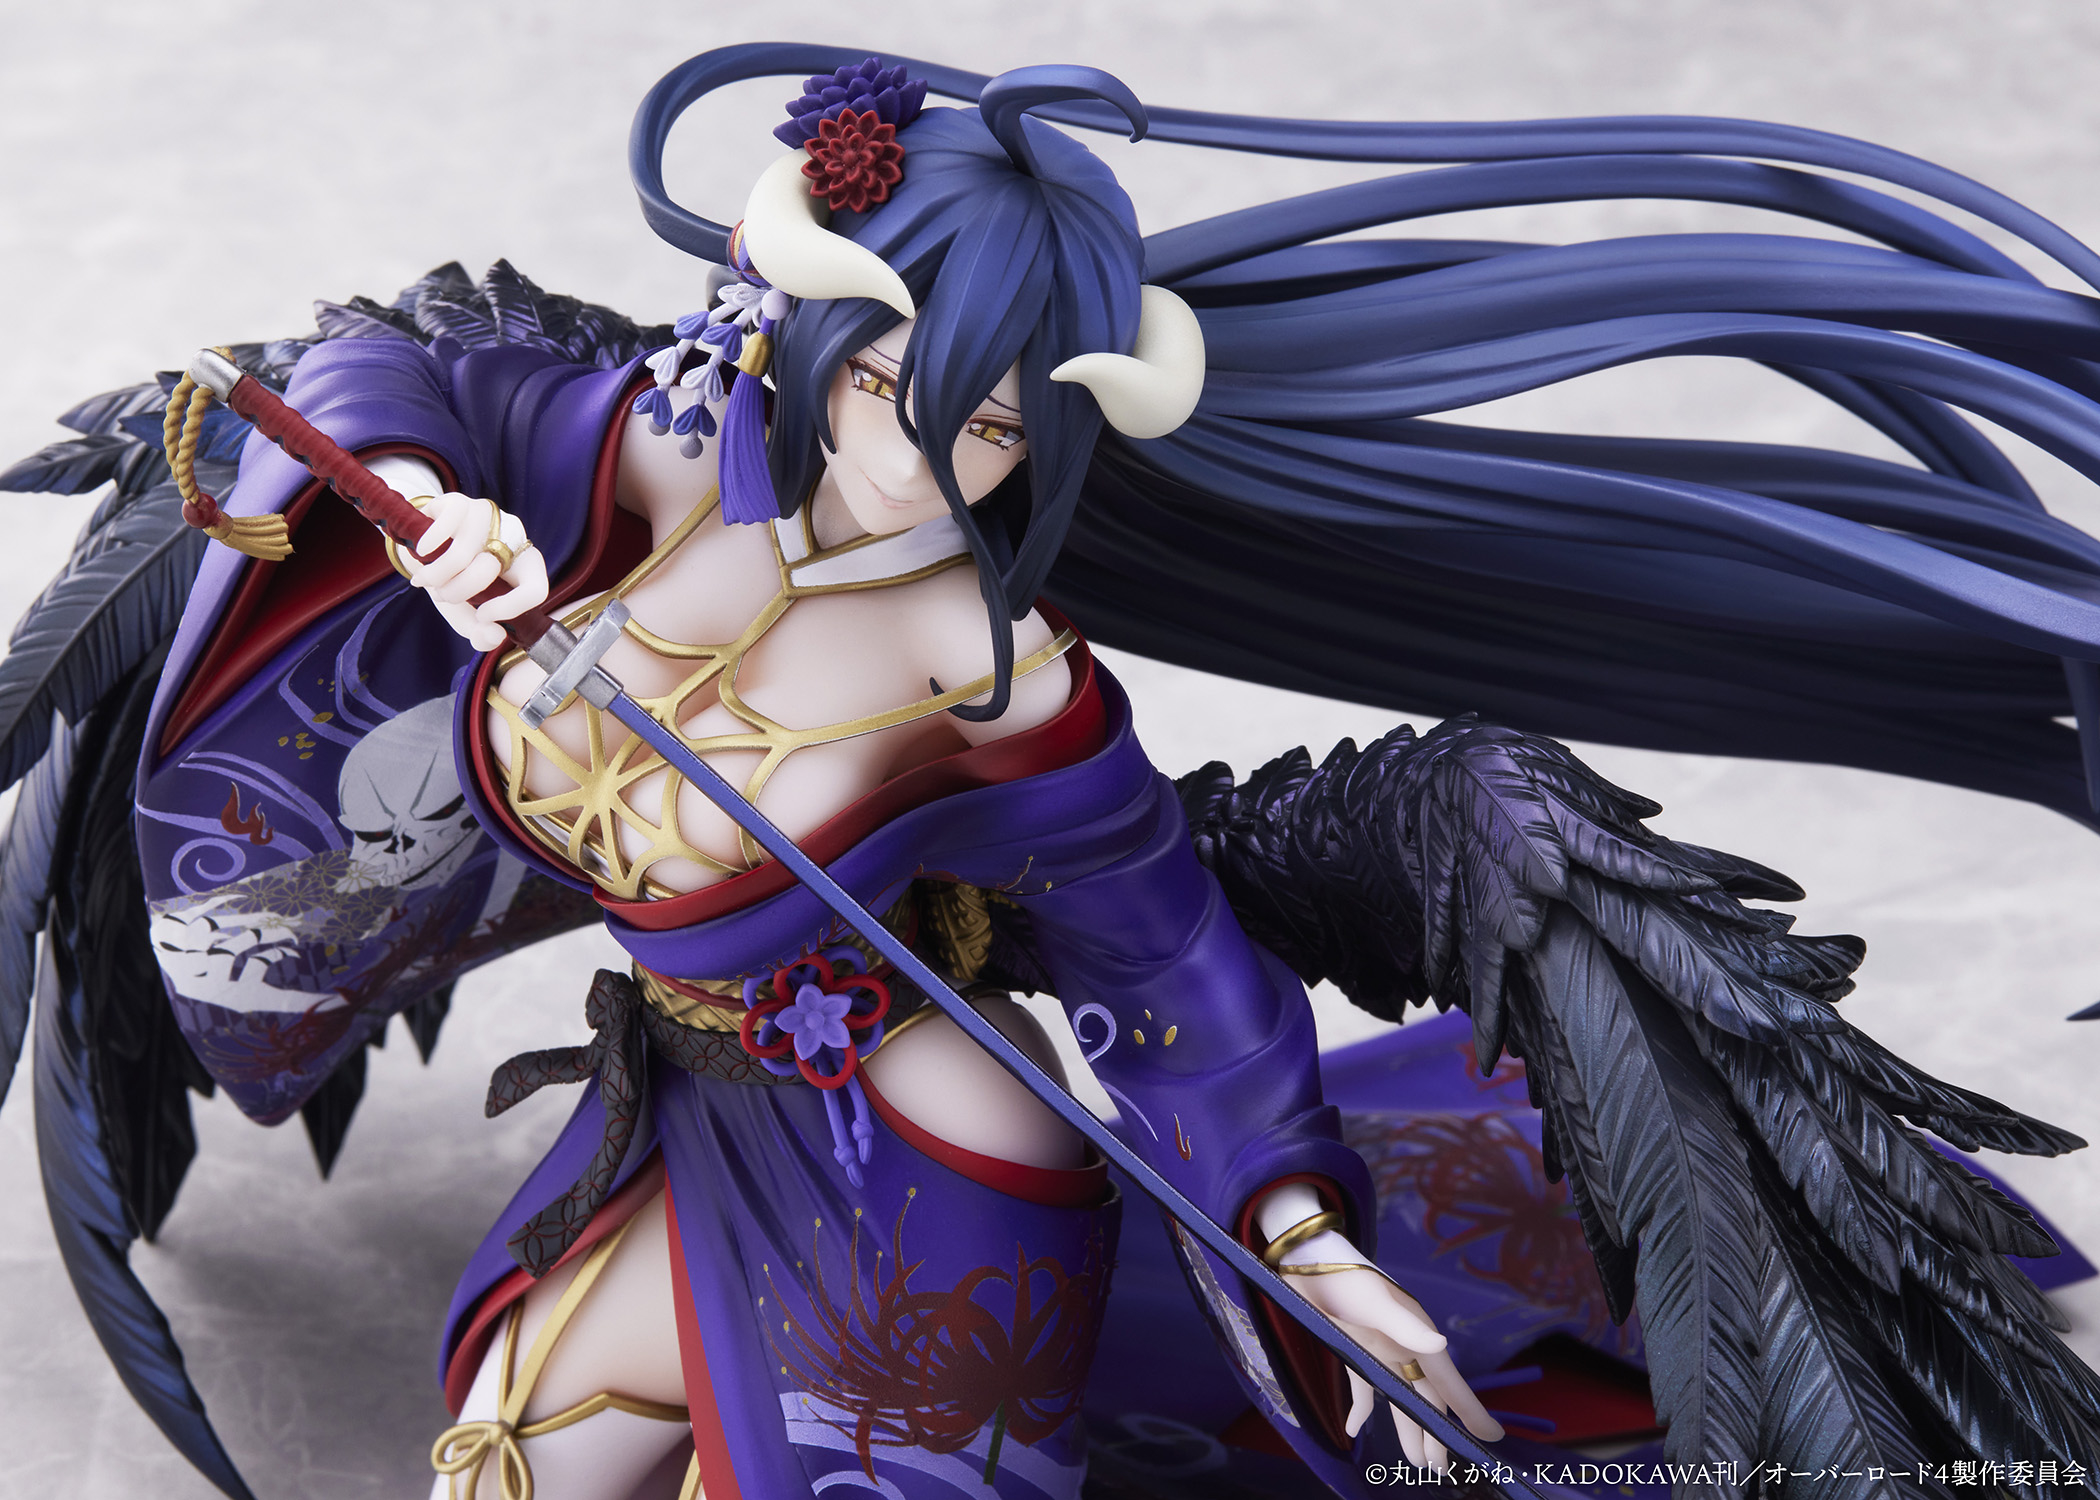 JUN219517 - OVERLORD IV ALBEDO WING 1/7 PVC FIG - Previews World